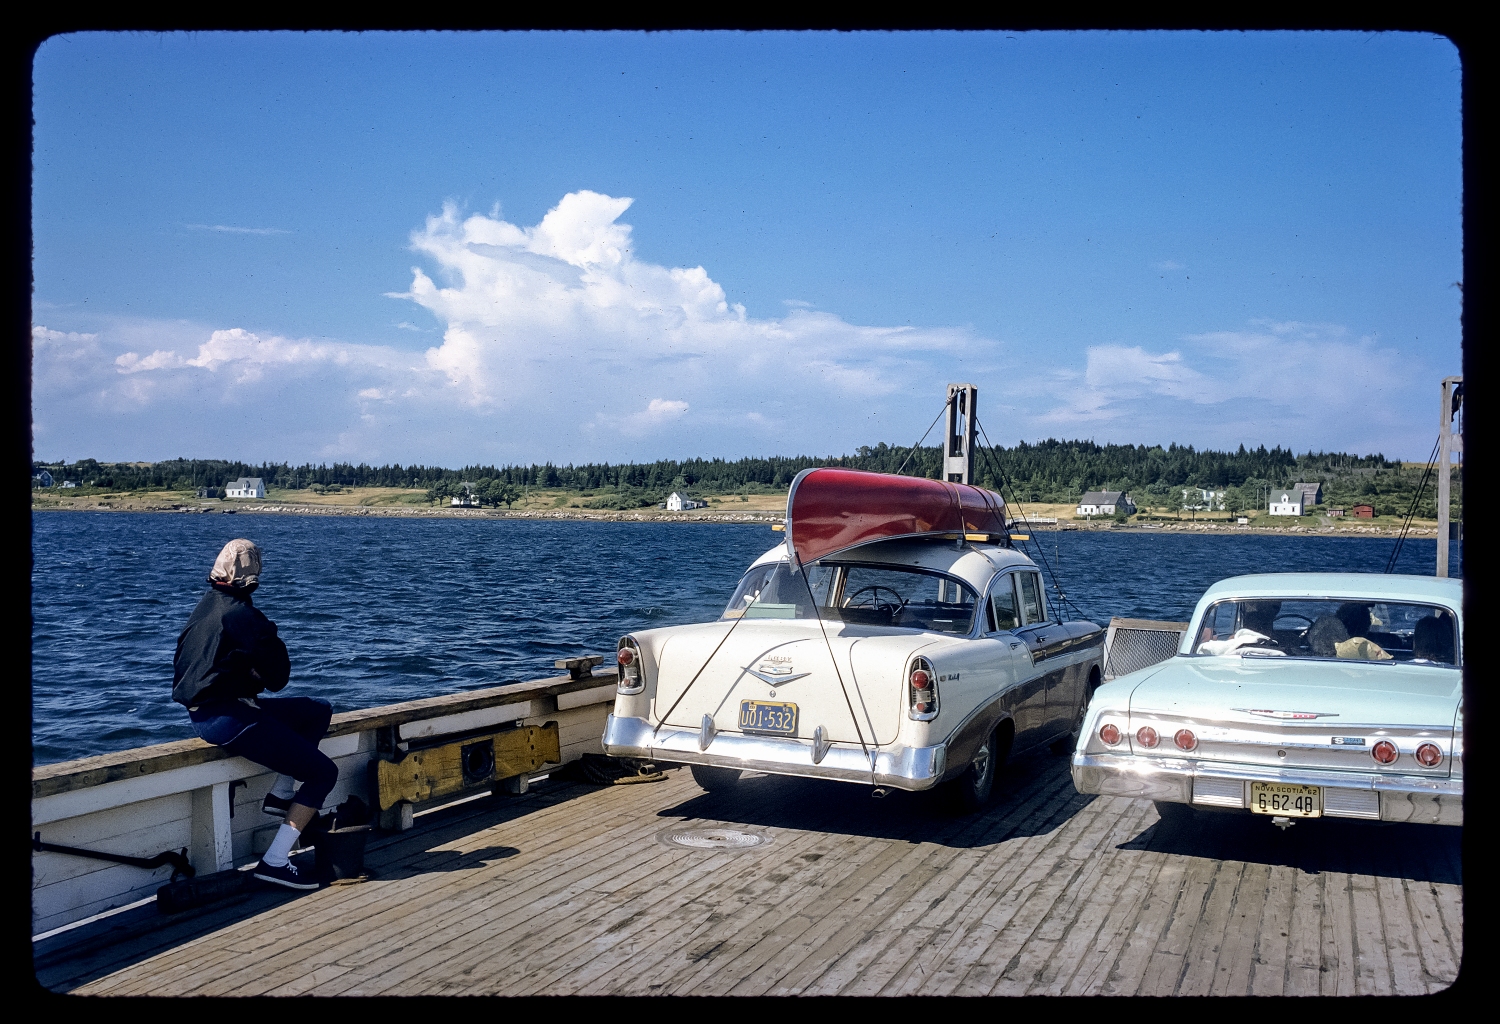 On a ferry in Nova Scotia with the '56 Chevy and the red canoe.